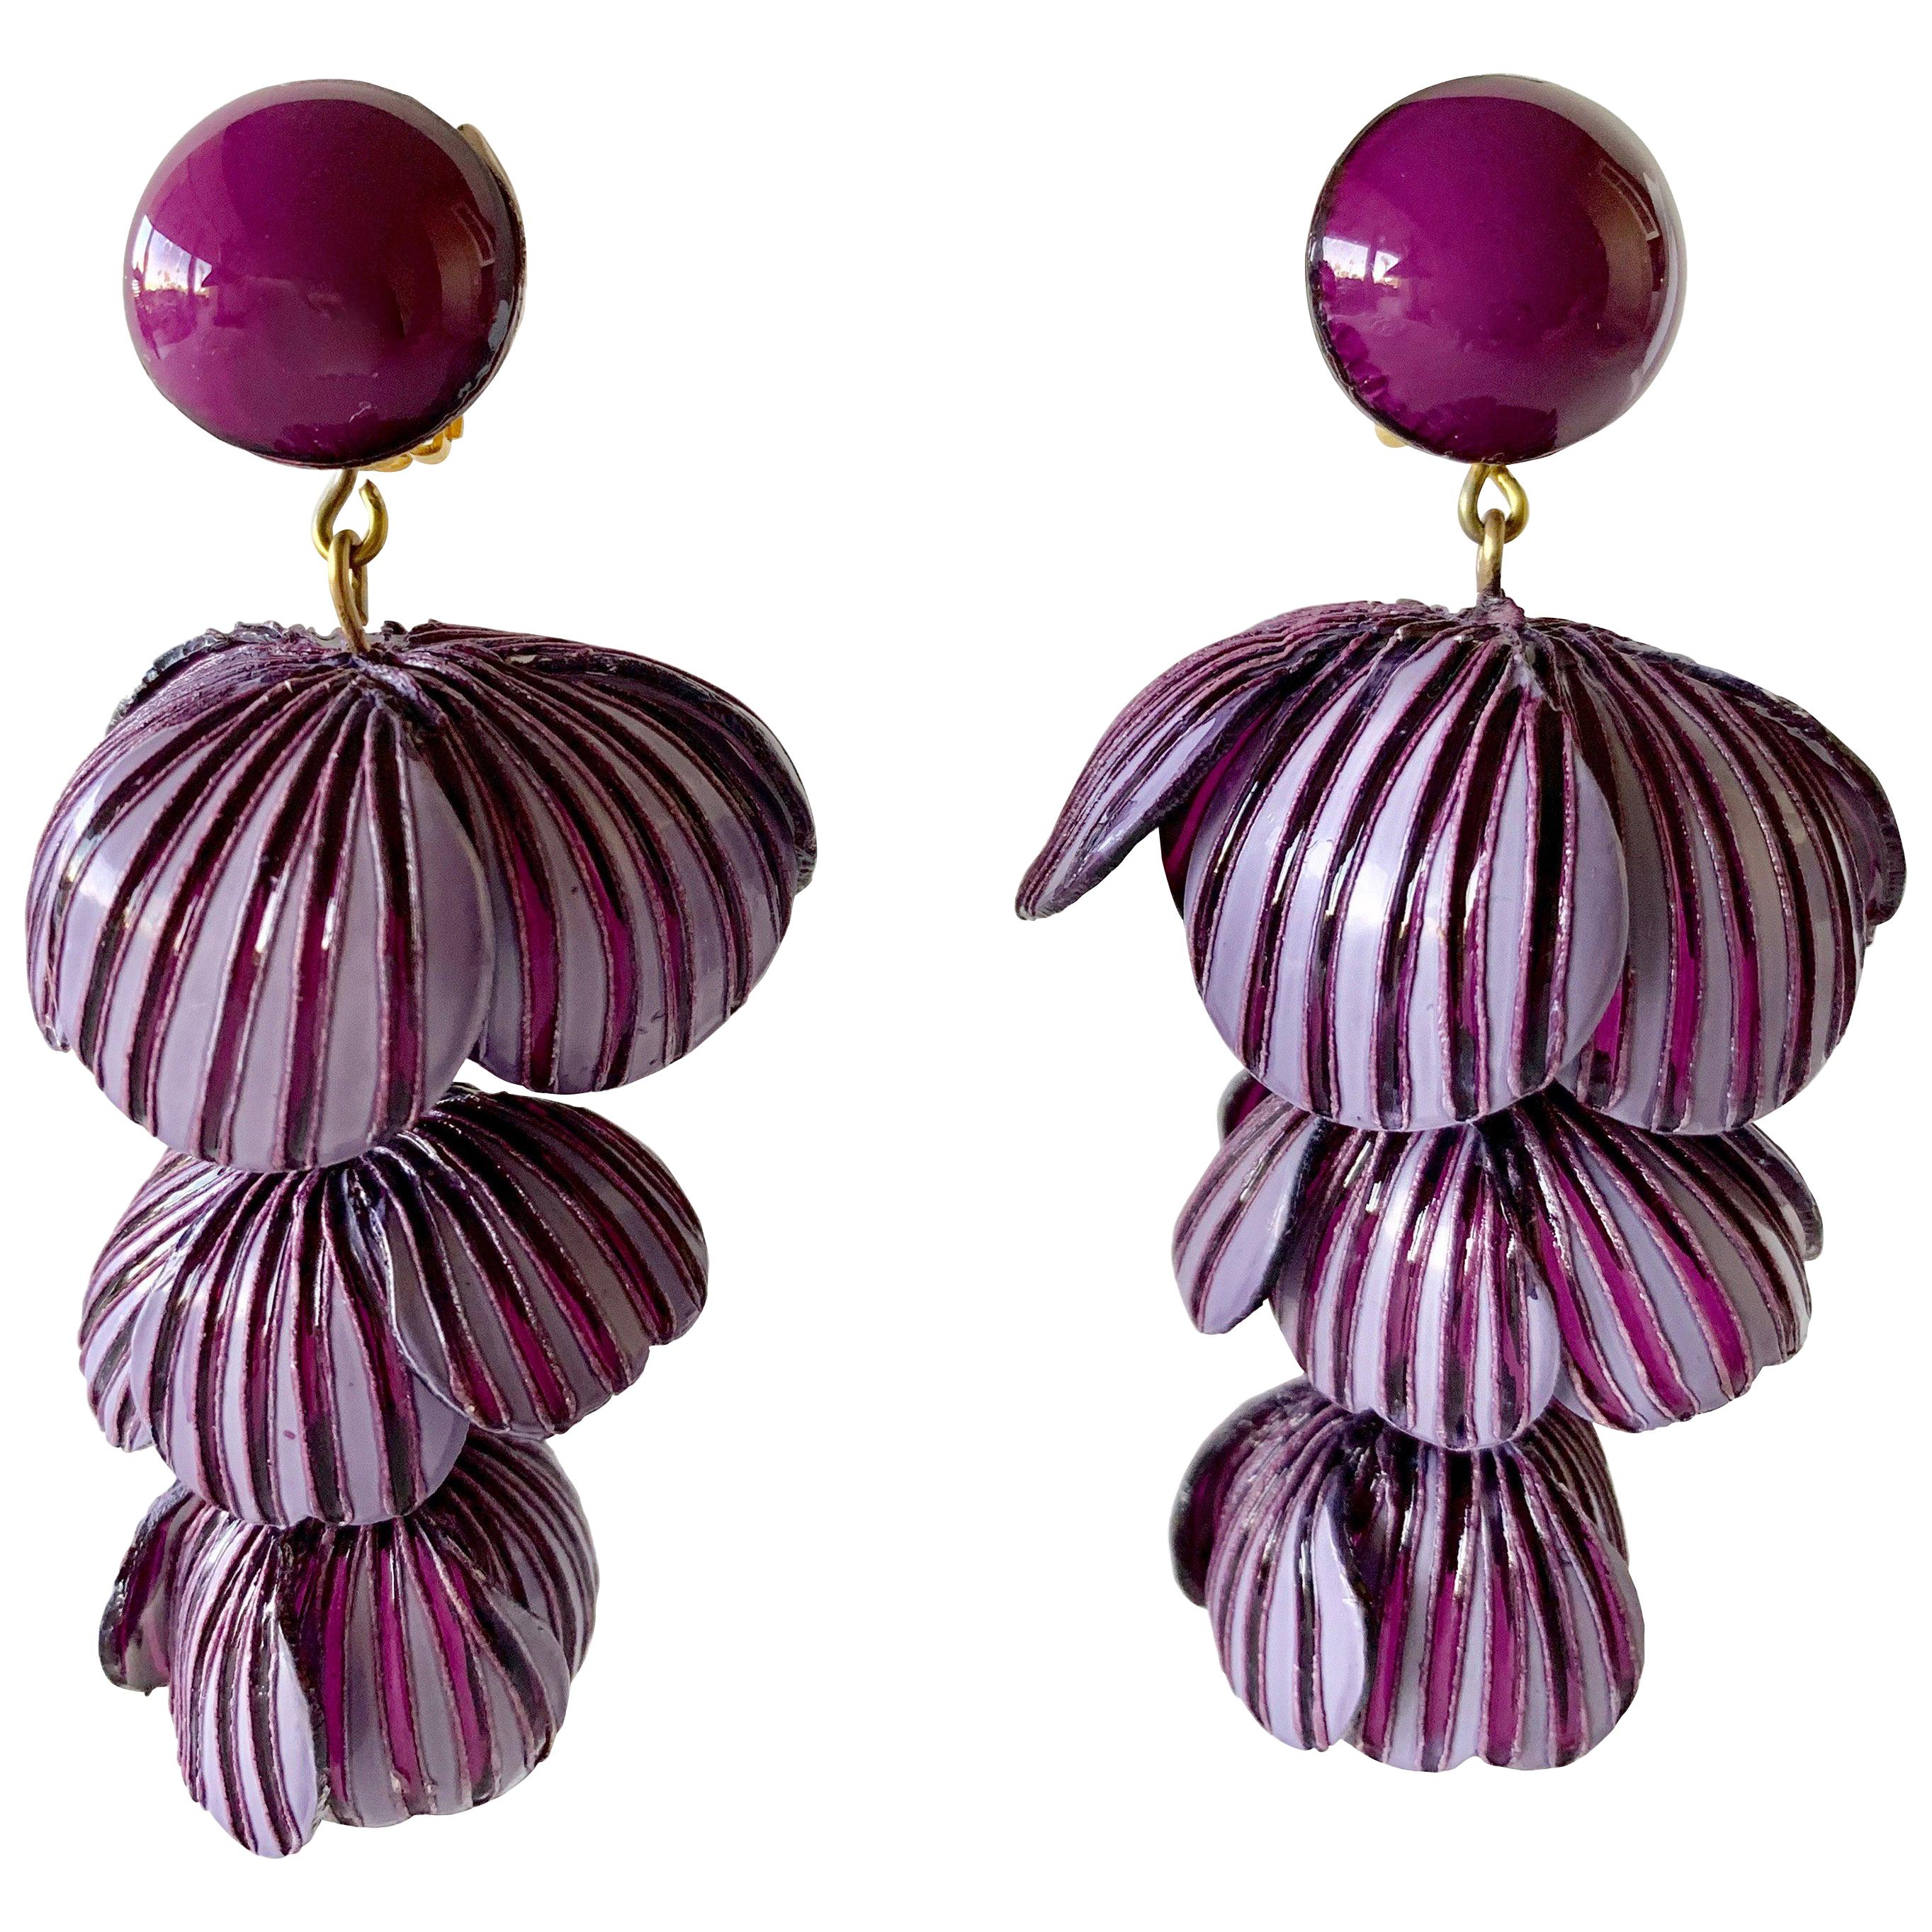  Architectural Two-tone Purple Flower Statement Earrings 